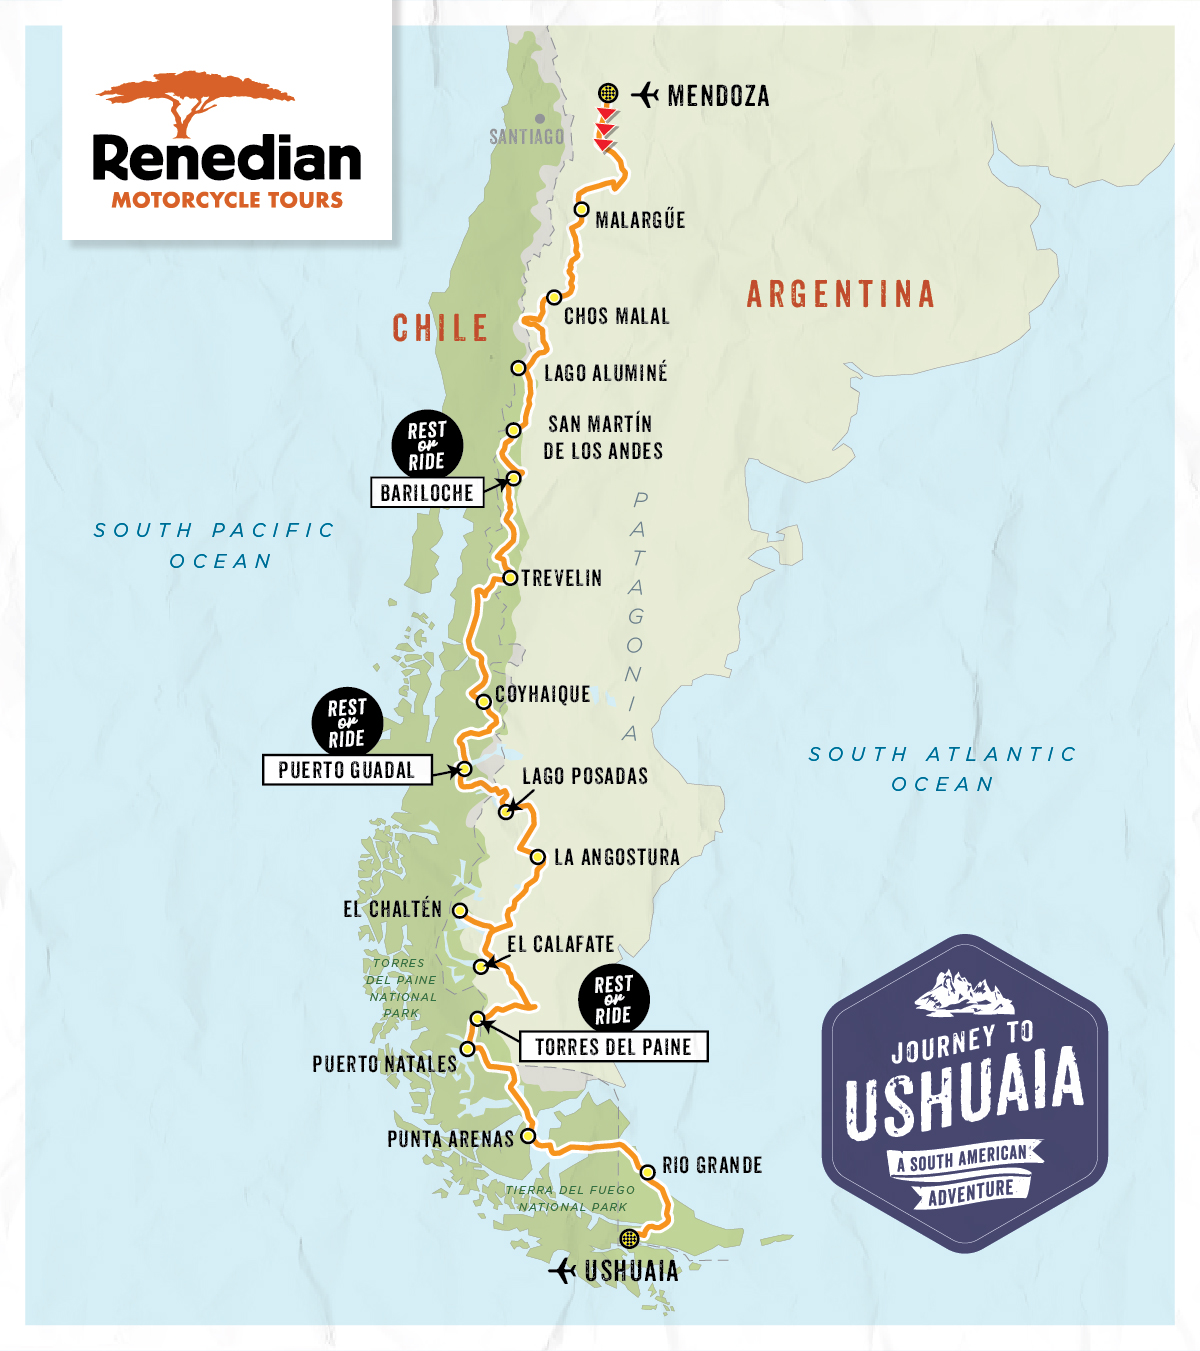 Renedian's South America motorcycle tour map